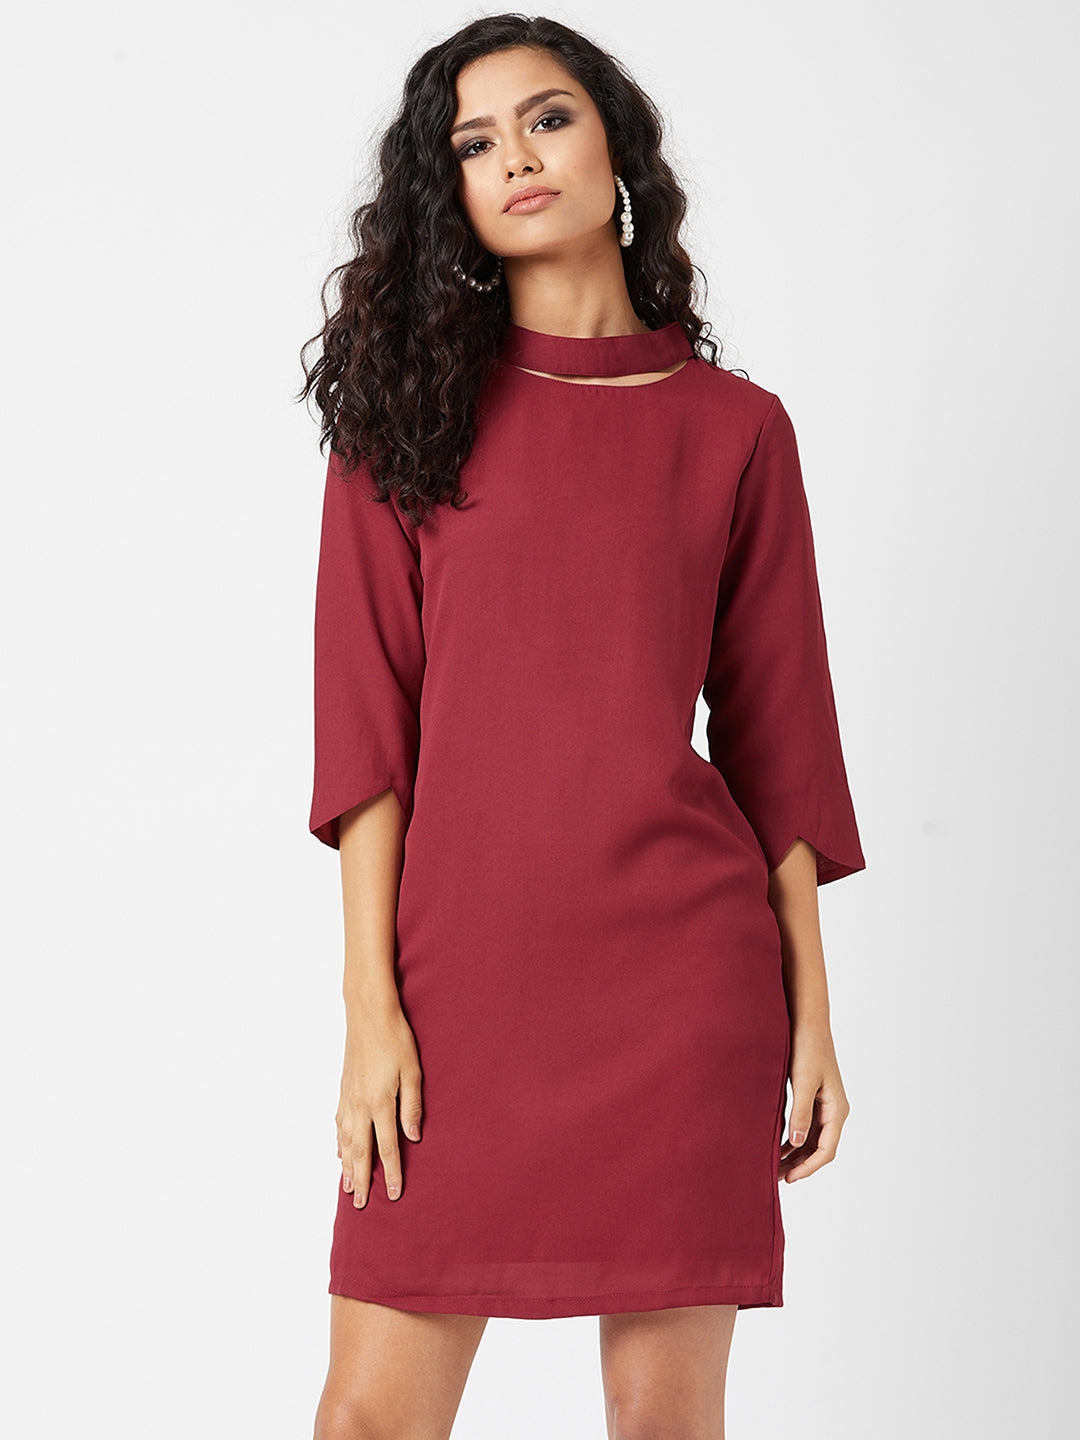 MISS CHASE | Women's Red Crepe  Dresses